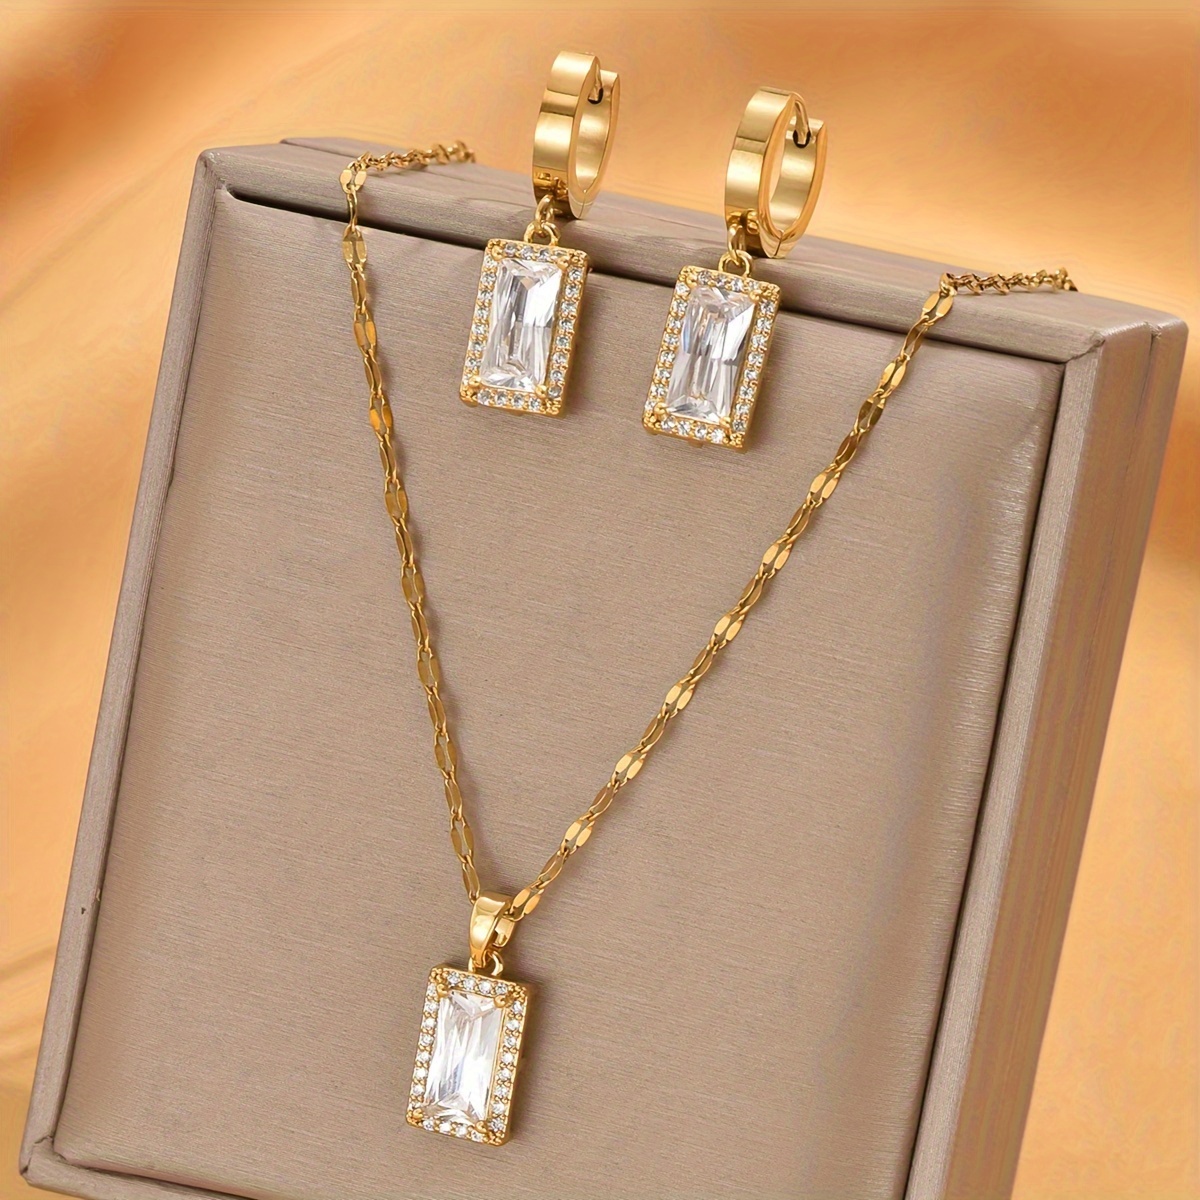 

3pcs Set Of Golden Stainless Steel Rhinestone Square Design Necklace Ear Buckles, 3-piece Set Fashionable, Simple, Retro, Versatile Women's Couples, Street, Daily Commuting, Festival, Party Wearing